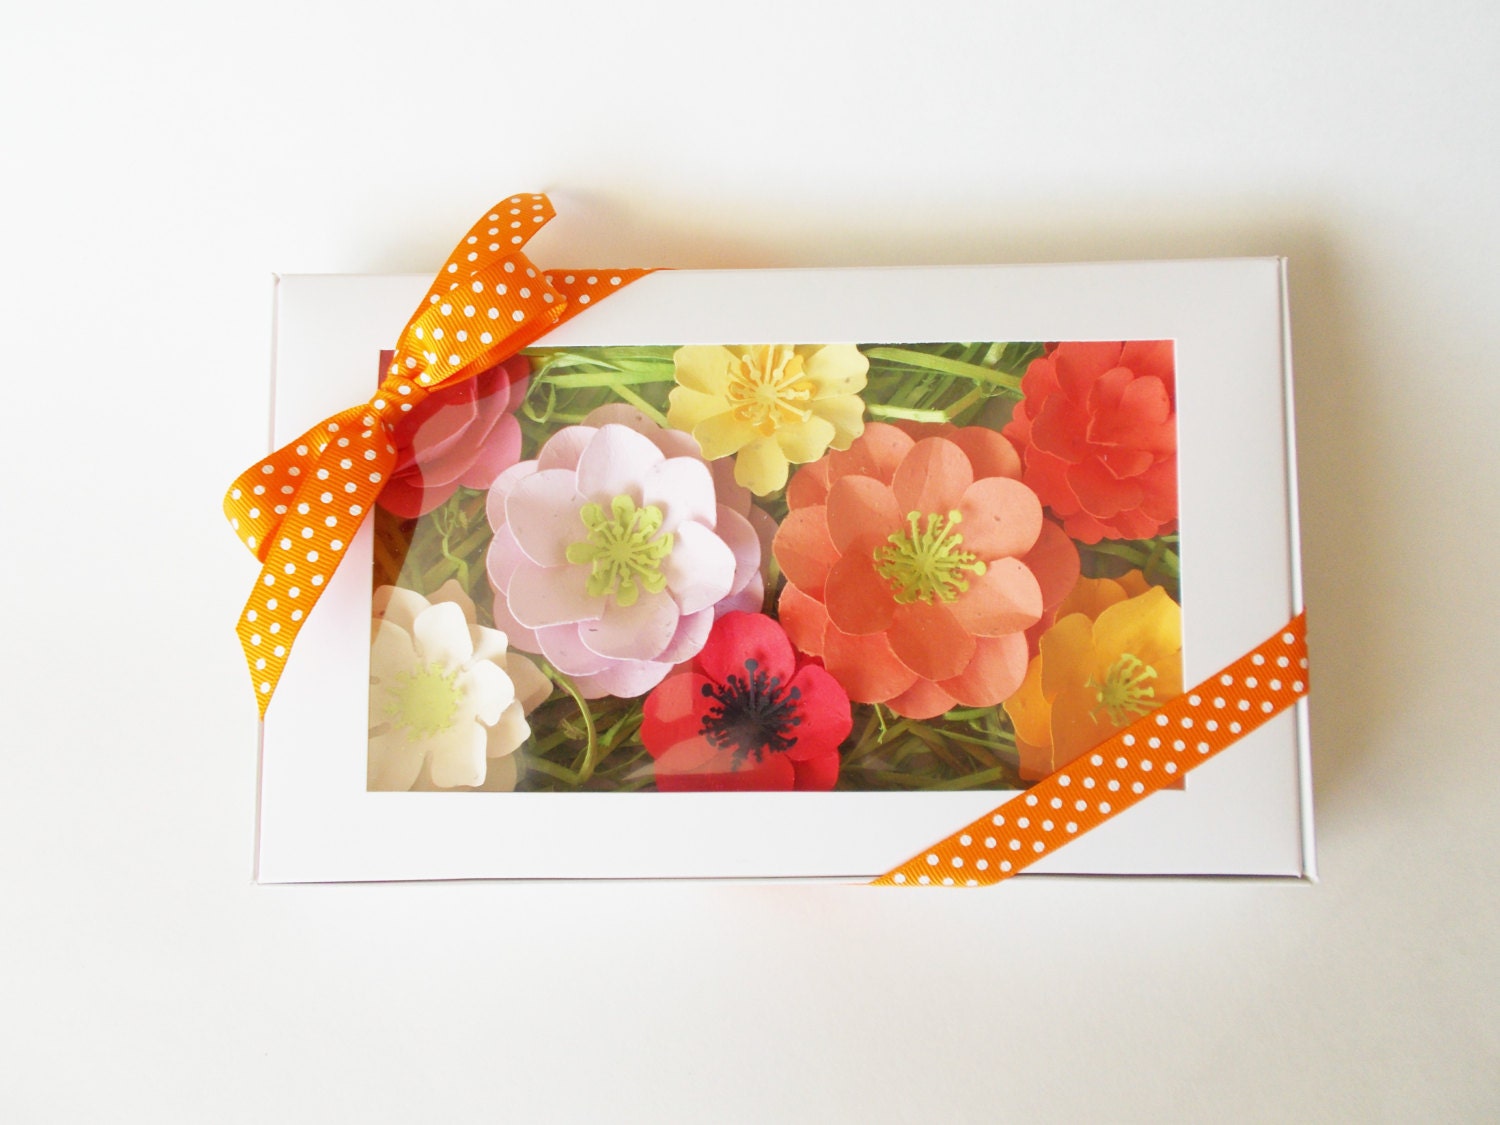 Plantable Wildflower Paper Flower Gift Set - Warm Colors  - Unique Gardening Set - Non GMO Seeds - Plant and Grow